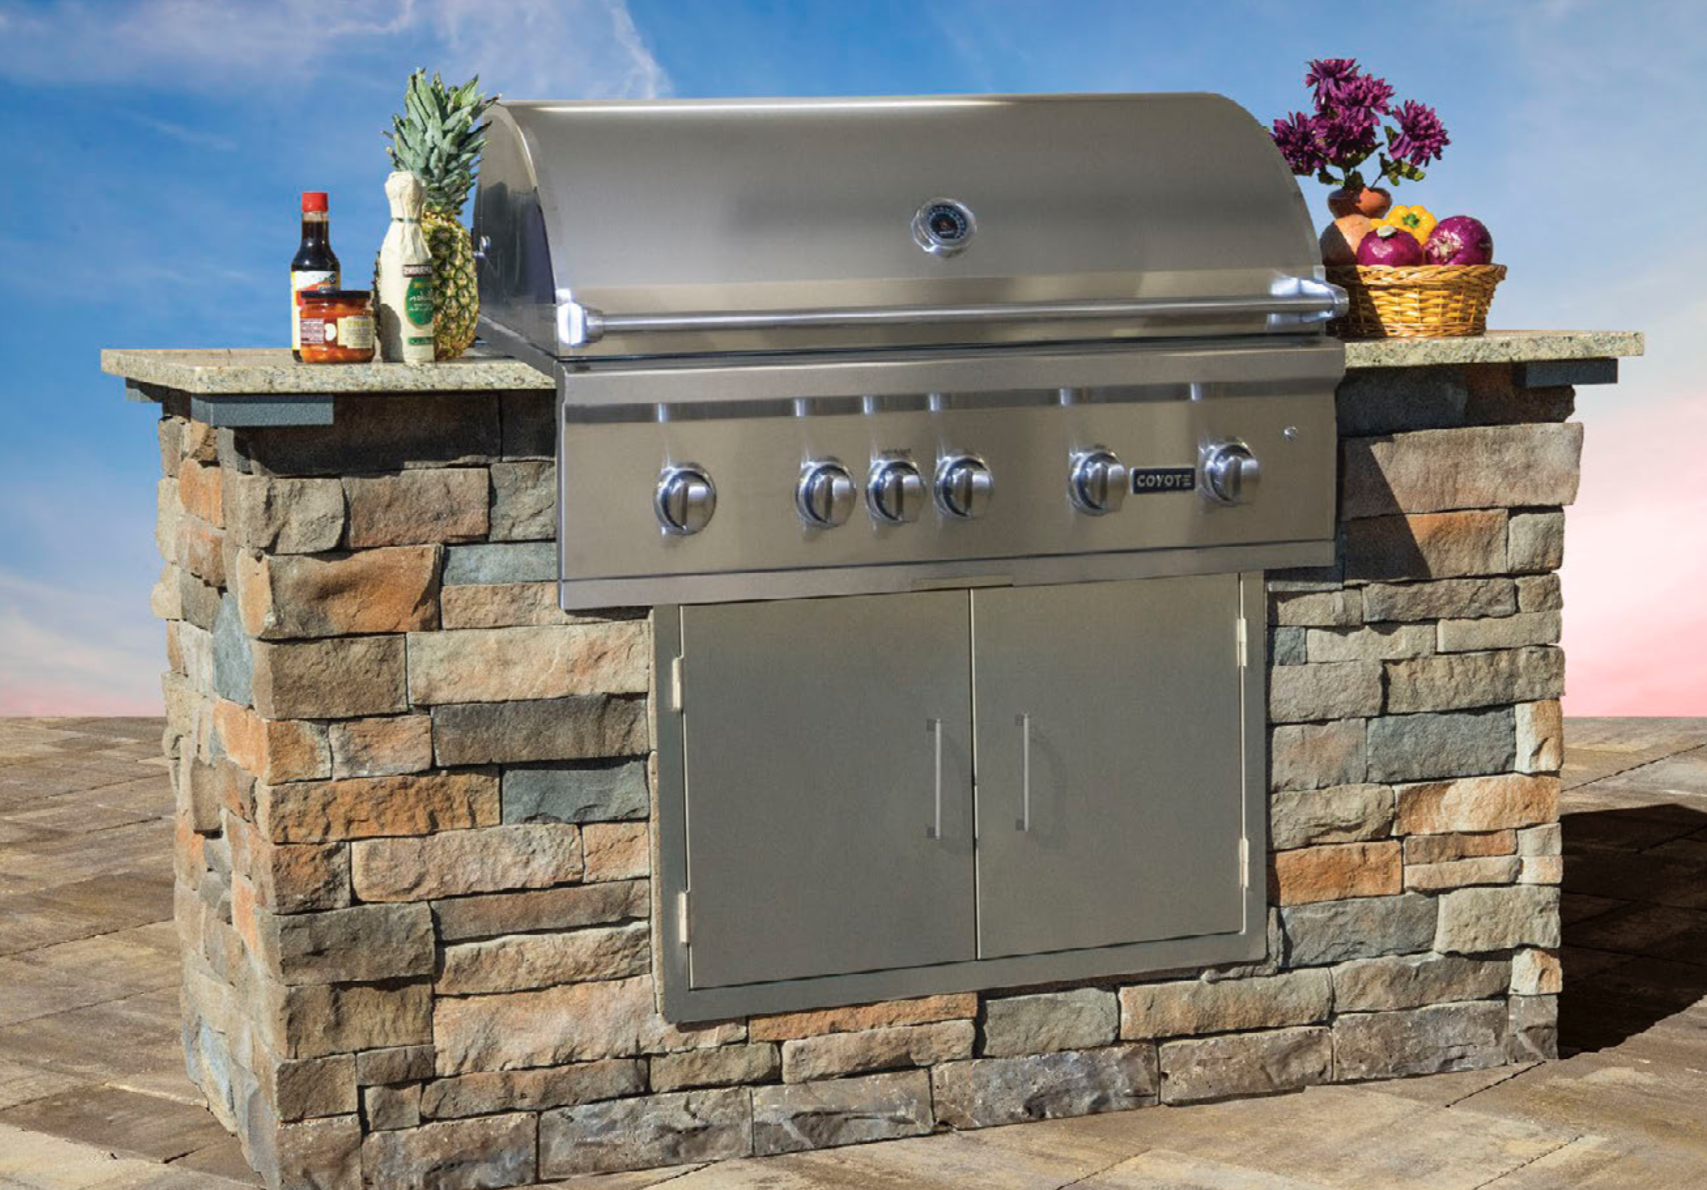 outdoor bbq installation. A ready-to-use grill, bbq